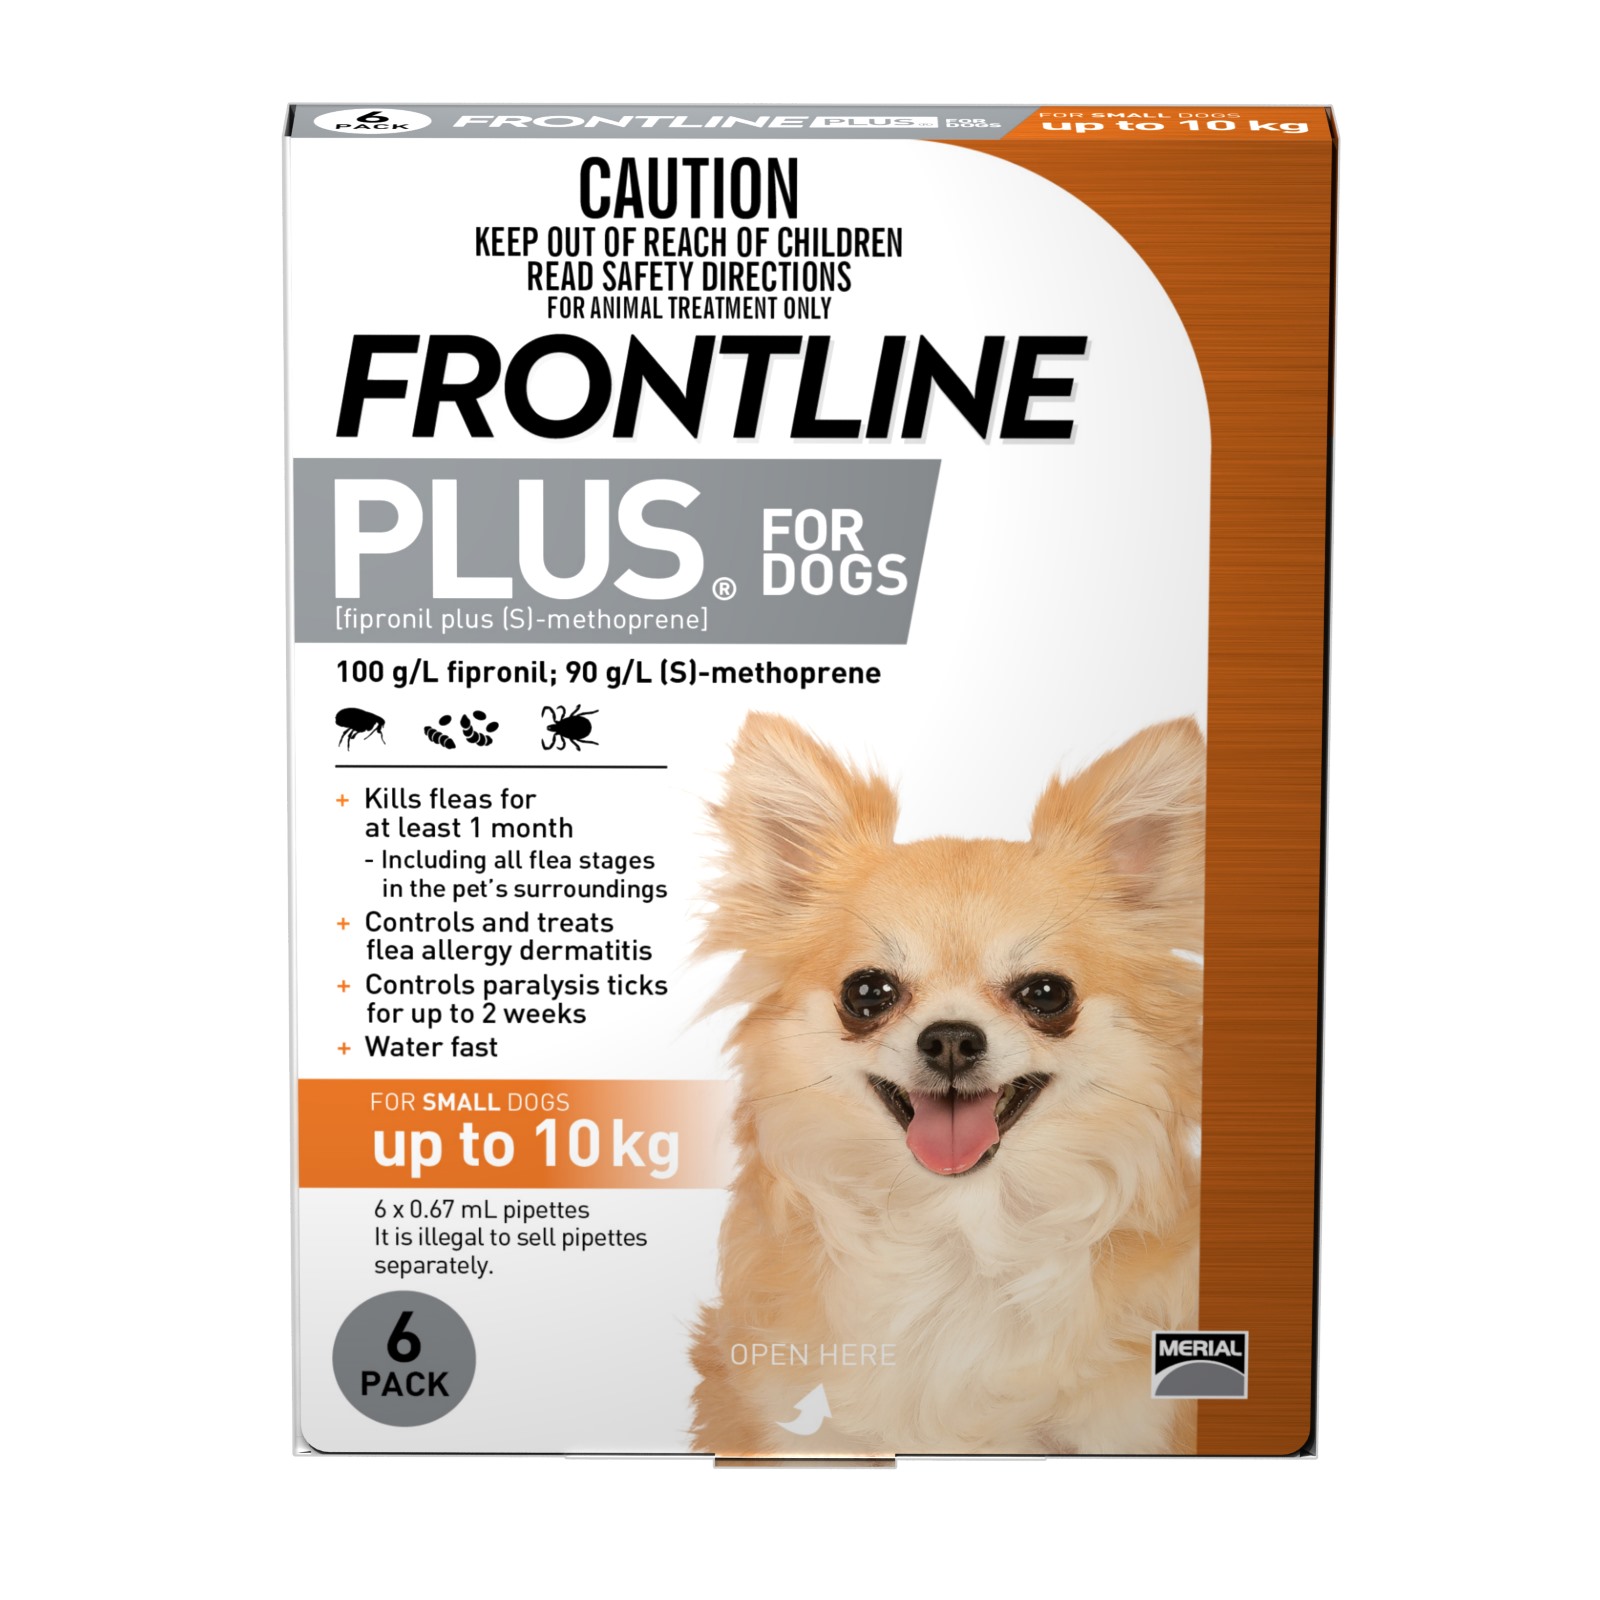 Frontline Plus Flea & Tick Protection for Dogs - 6 Pack image 0